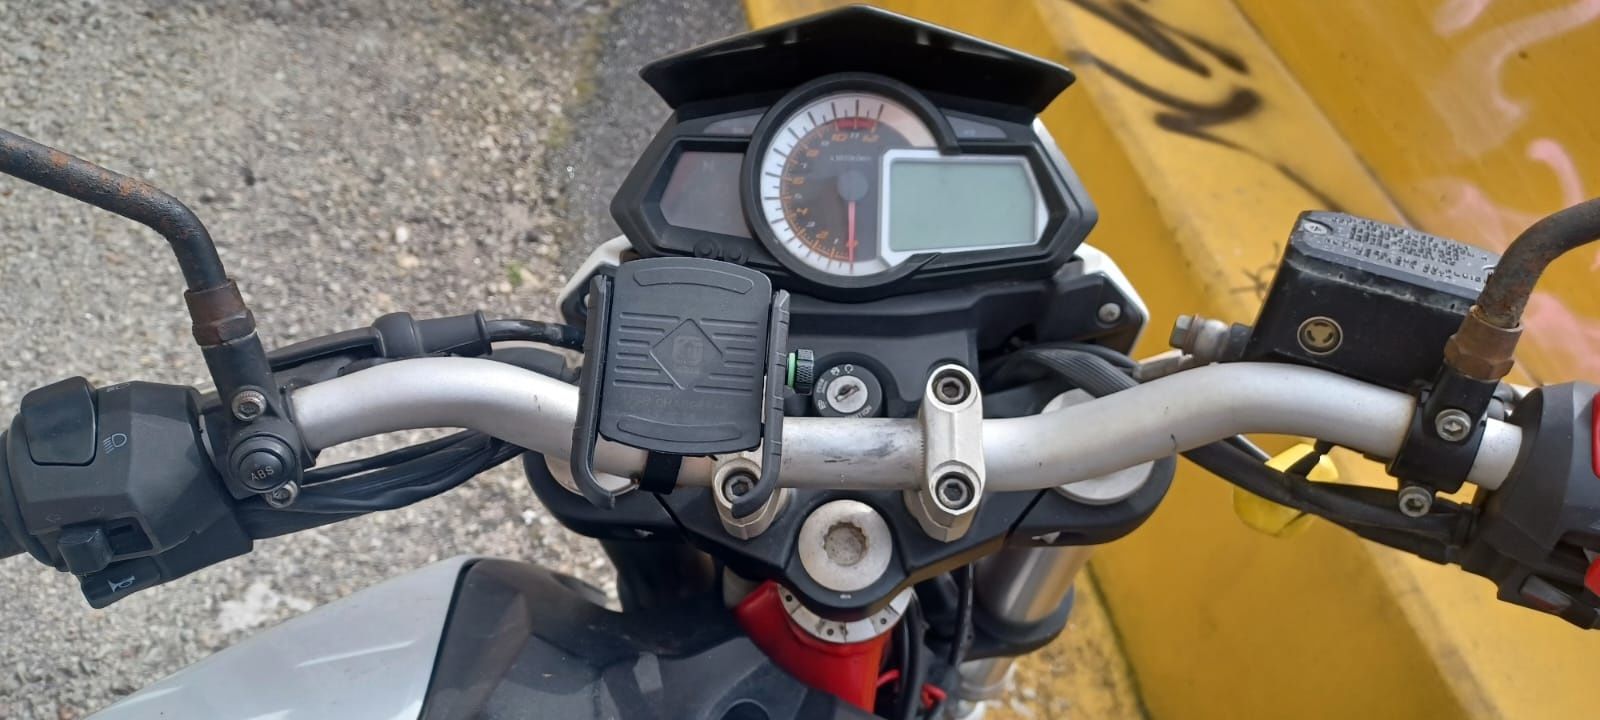 Benelli  251 abs 2018